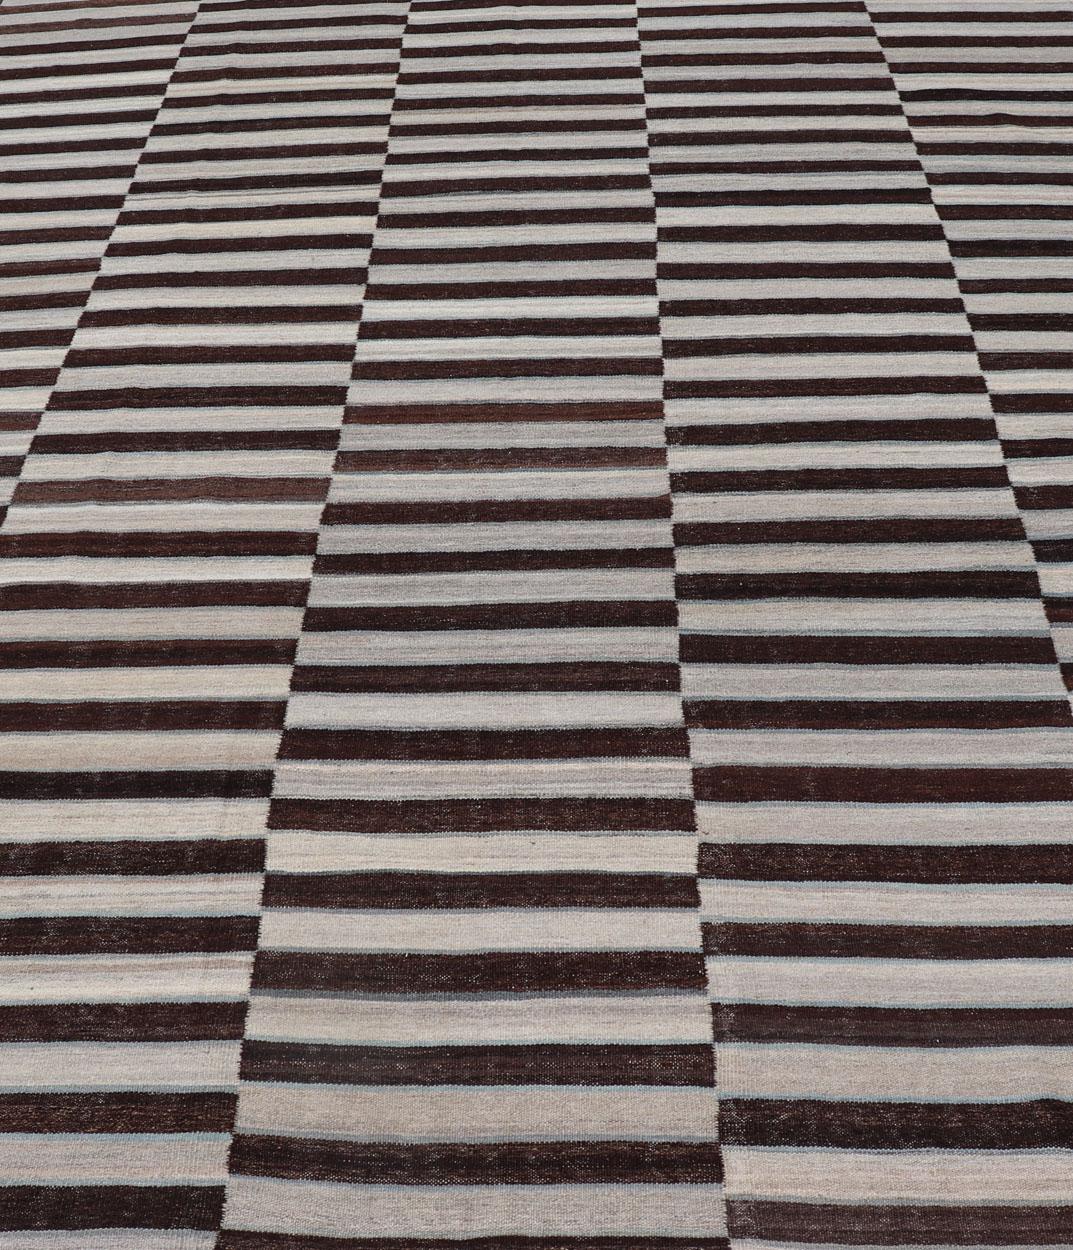 Contemporary Modern Kilim Rug in Multi-Panel Striped Design with Chocolate Brown, cream  For Sale